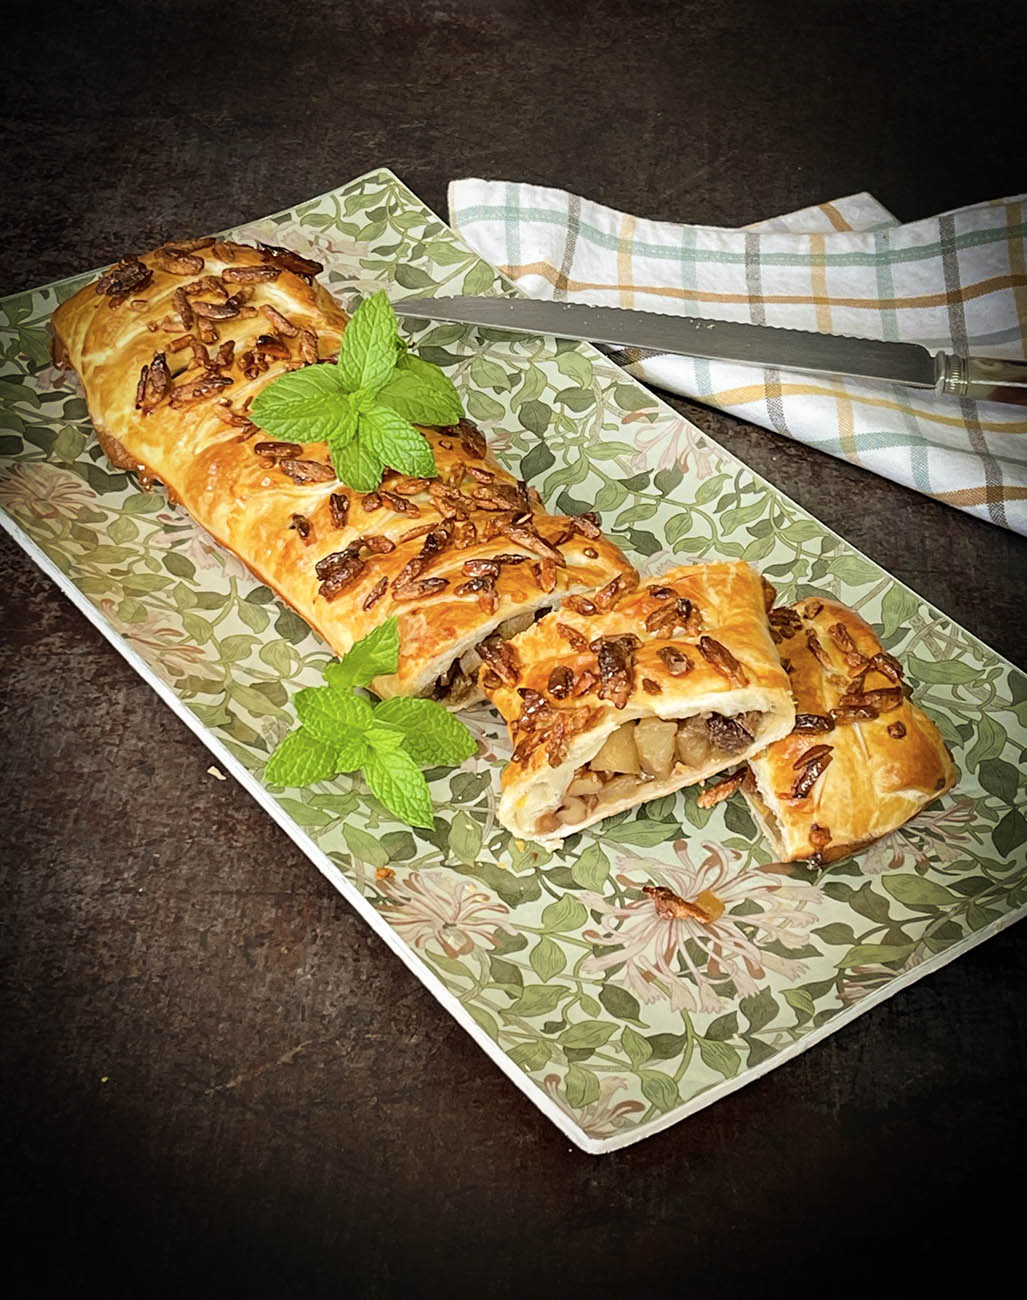 Puff pastry braid with apples, grapes and walnuts